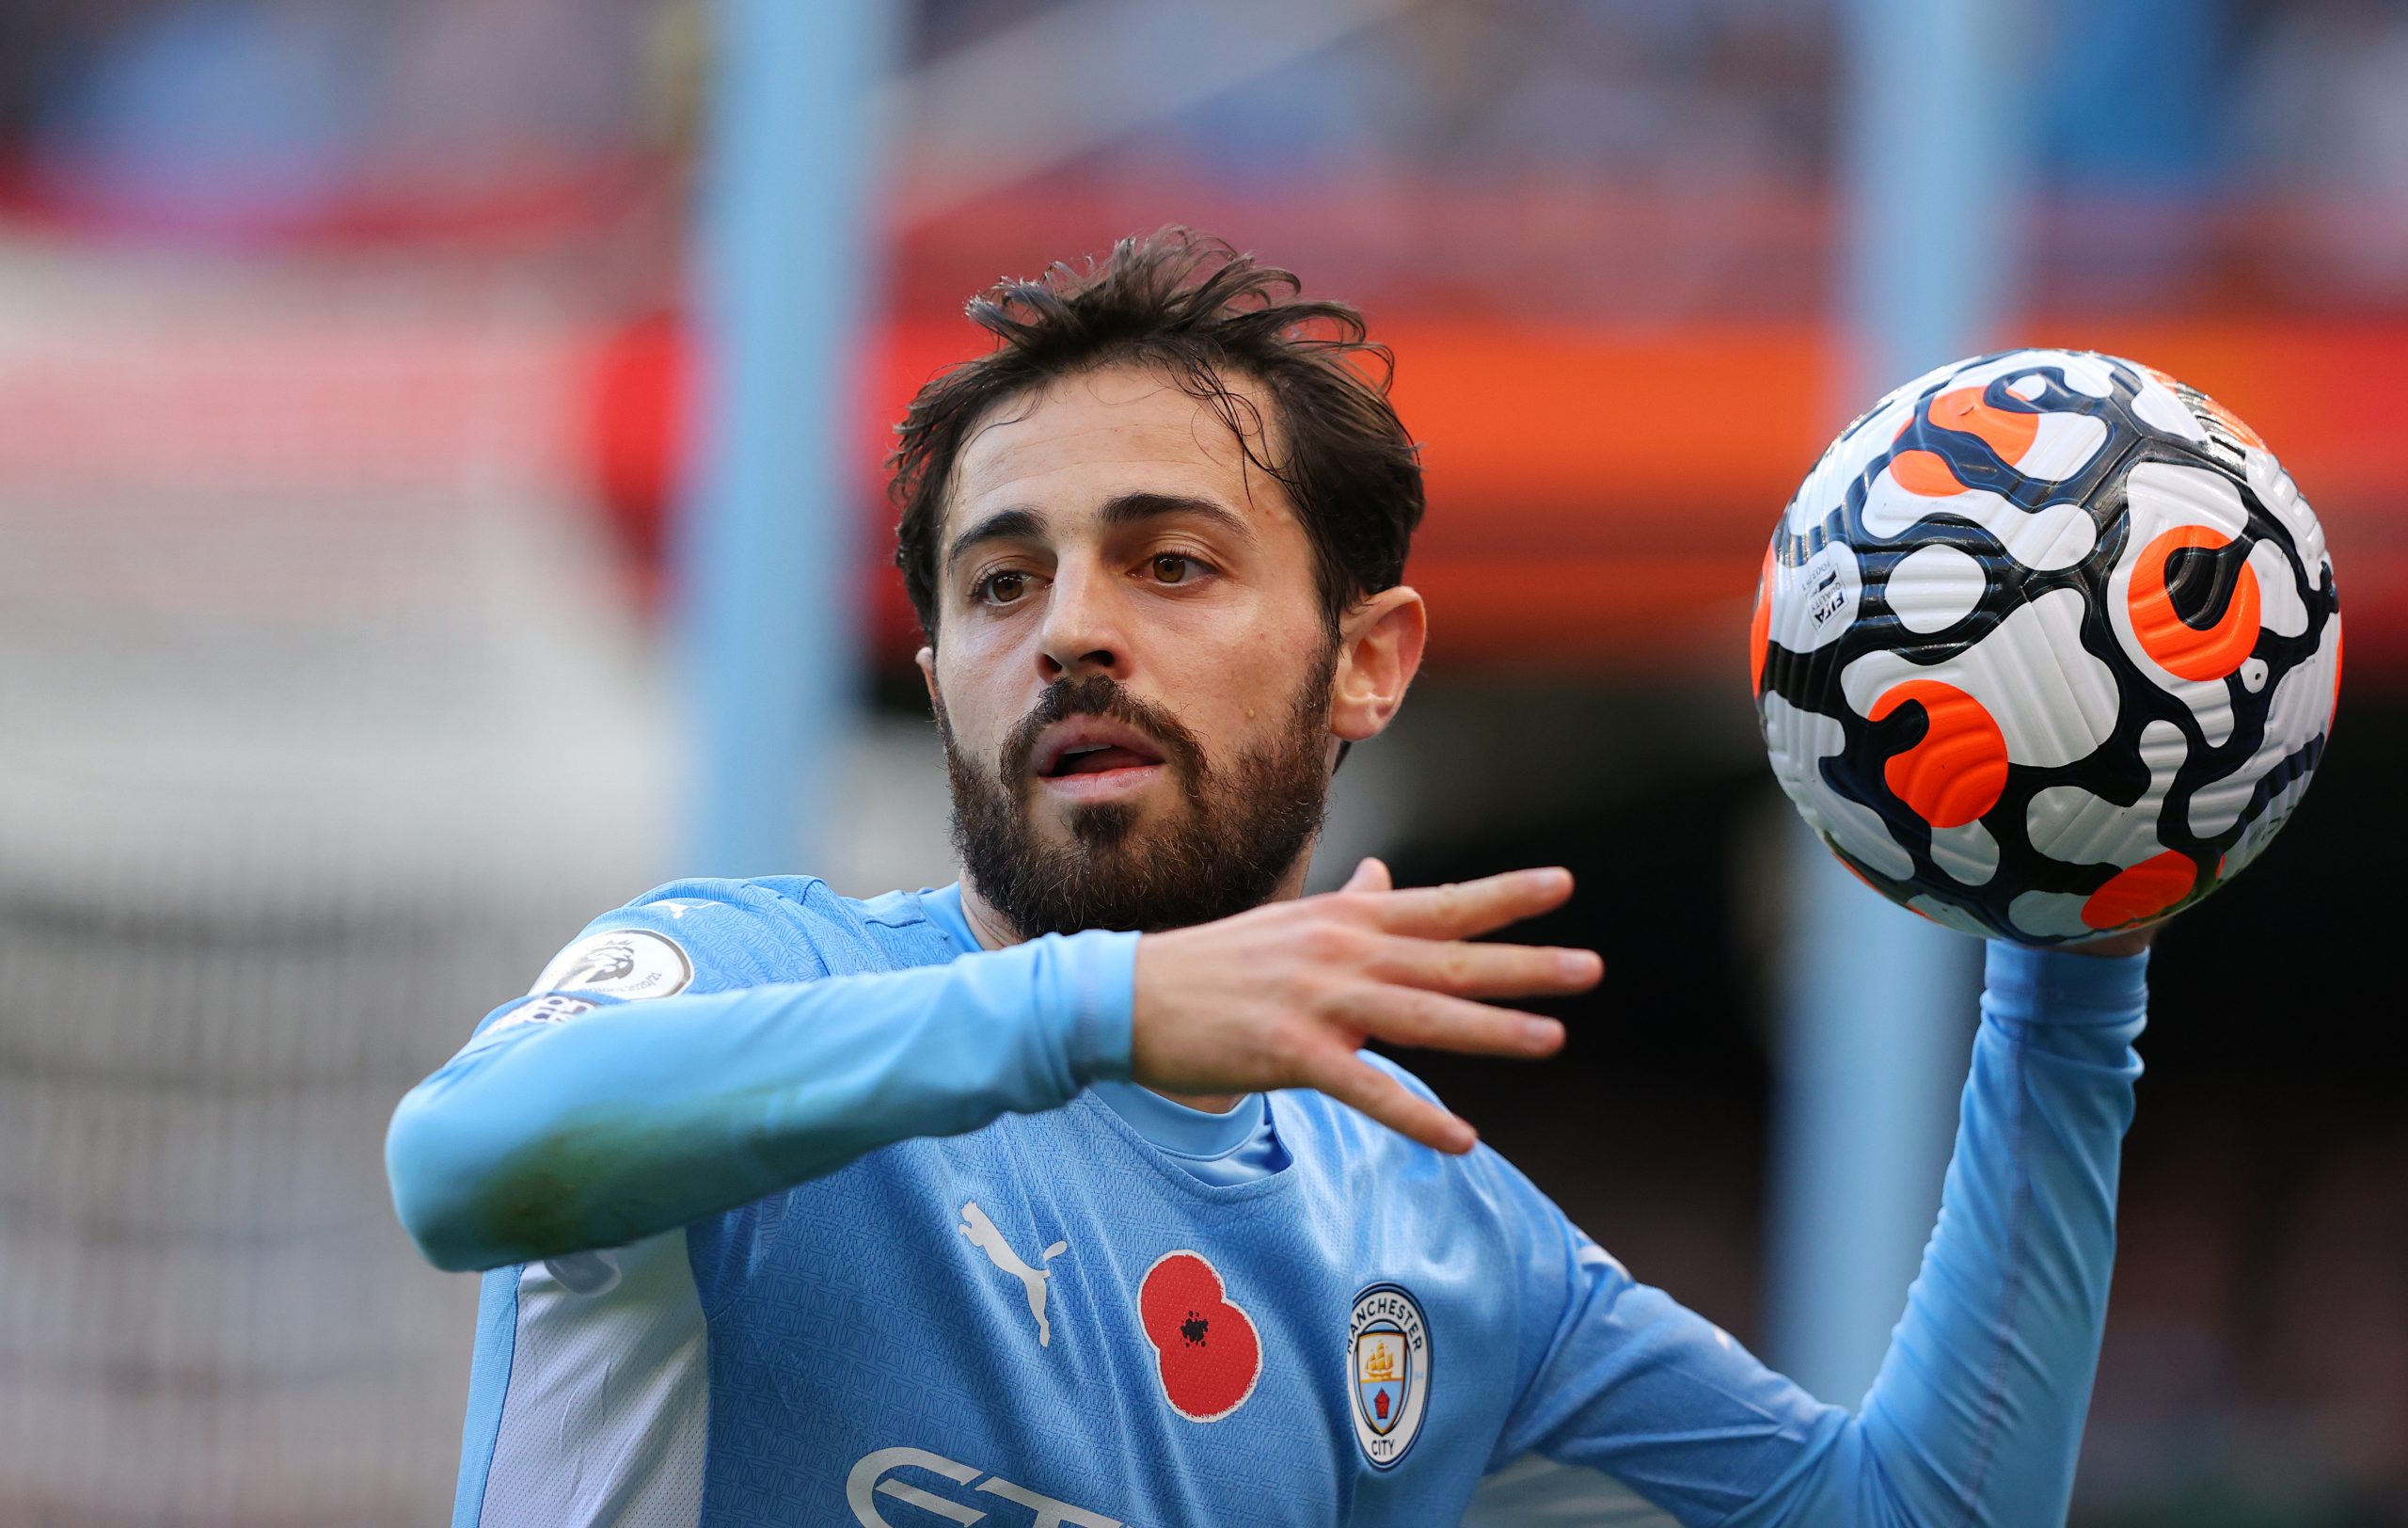 Bernardo Silva scored the 2nd goal for Man City as Man United failed to get near the ball on the day. (Photo by Alex Livesey/Getty Images)